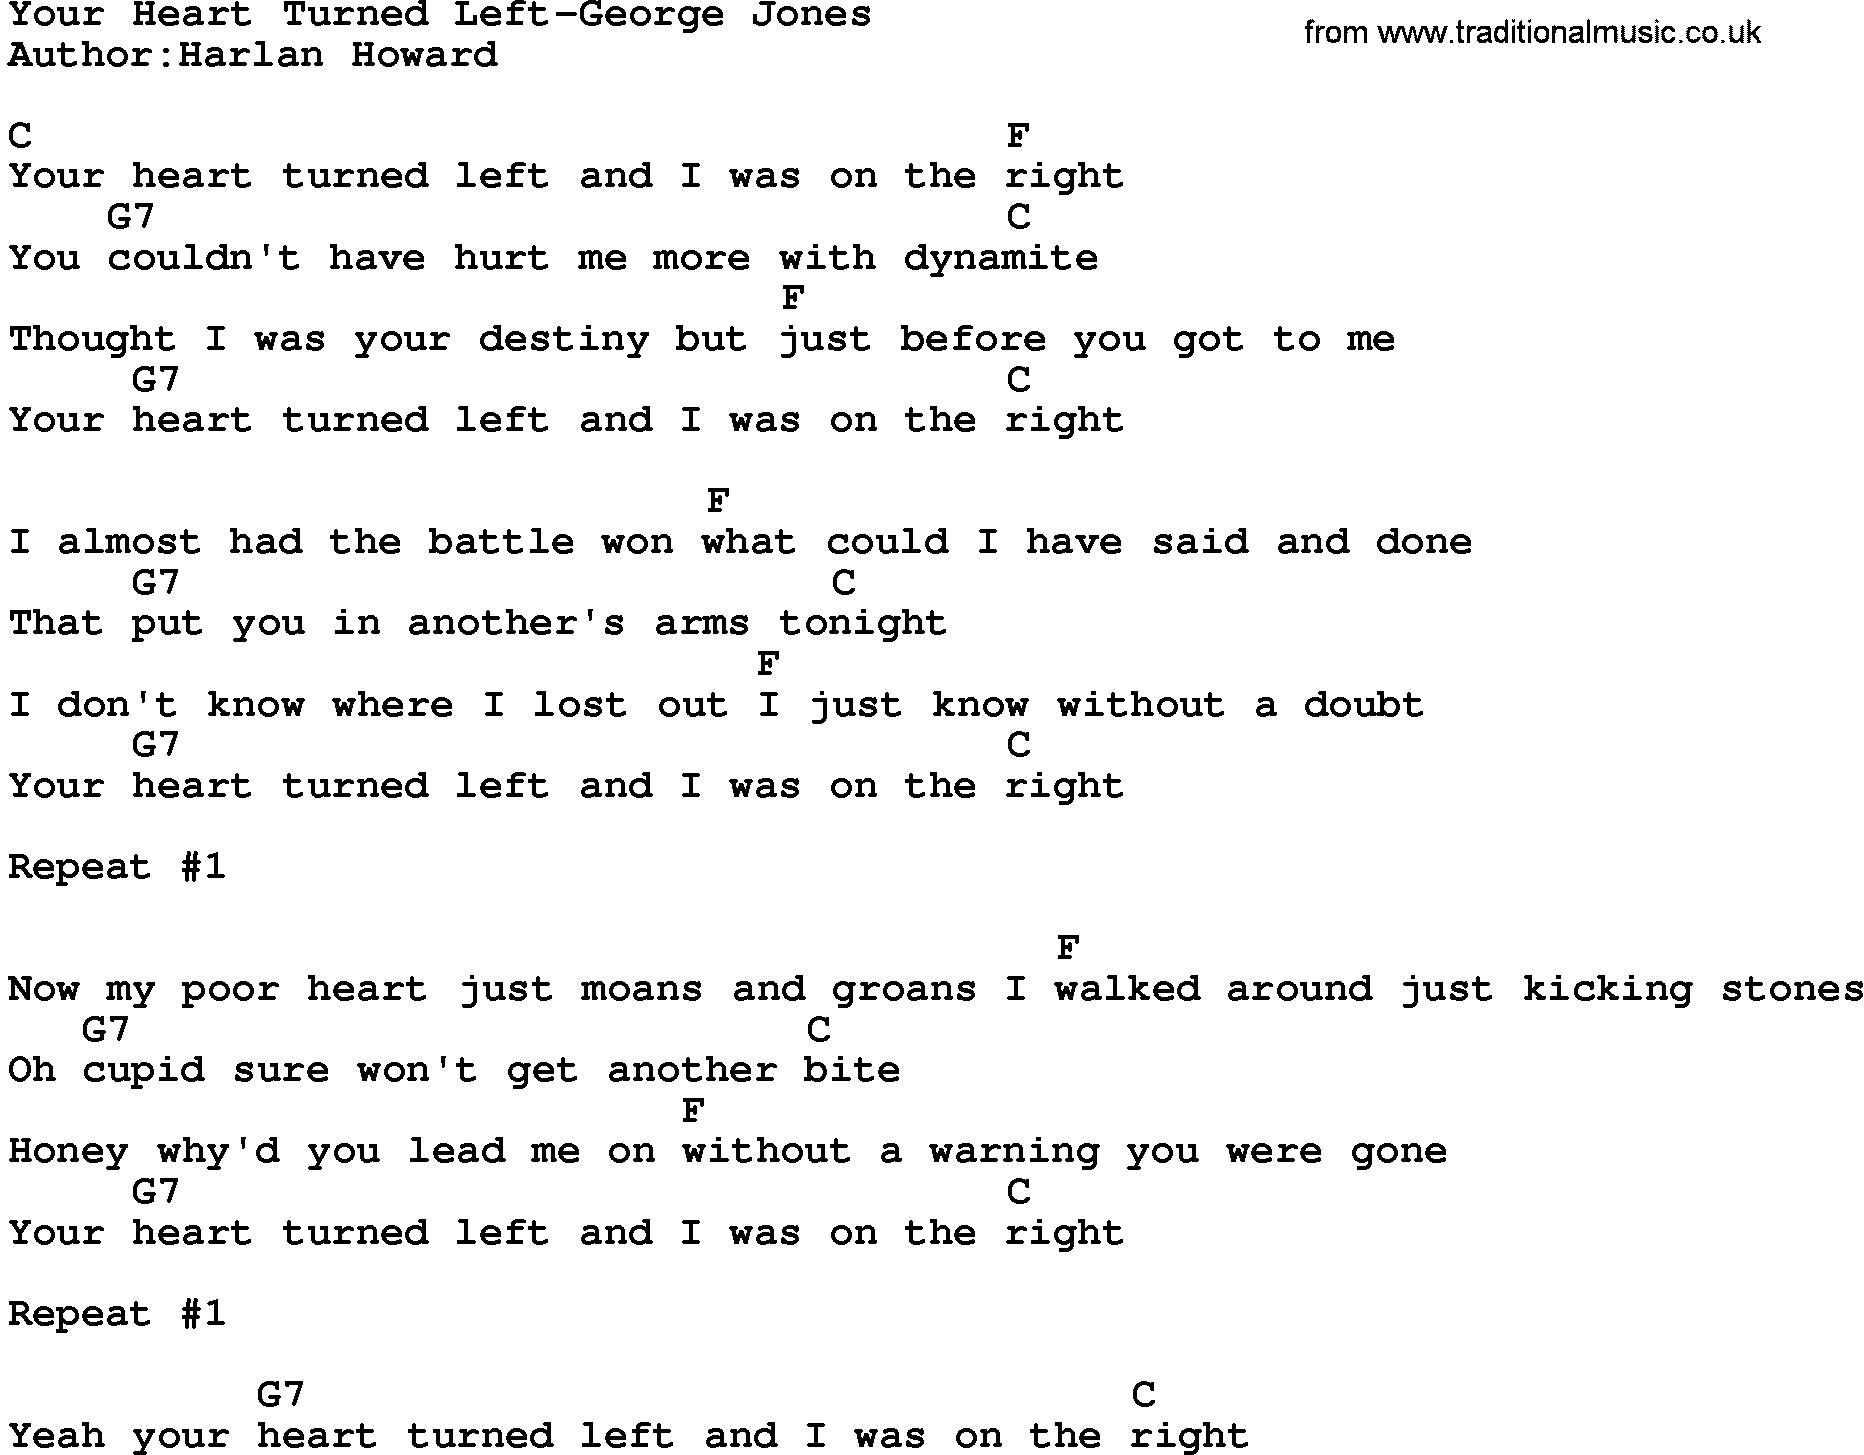 Country music song: Your Heart Turned Left-George Jones lyrics and chords